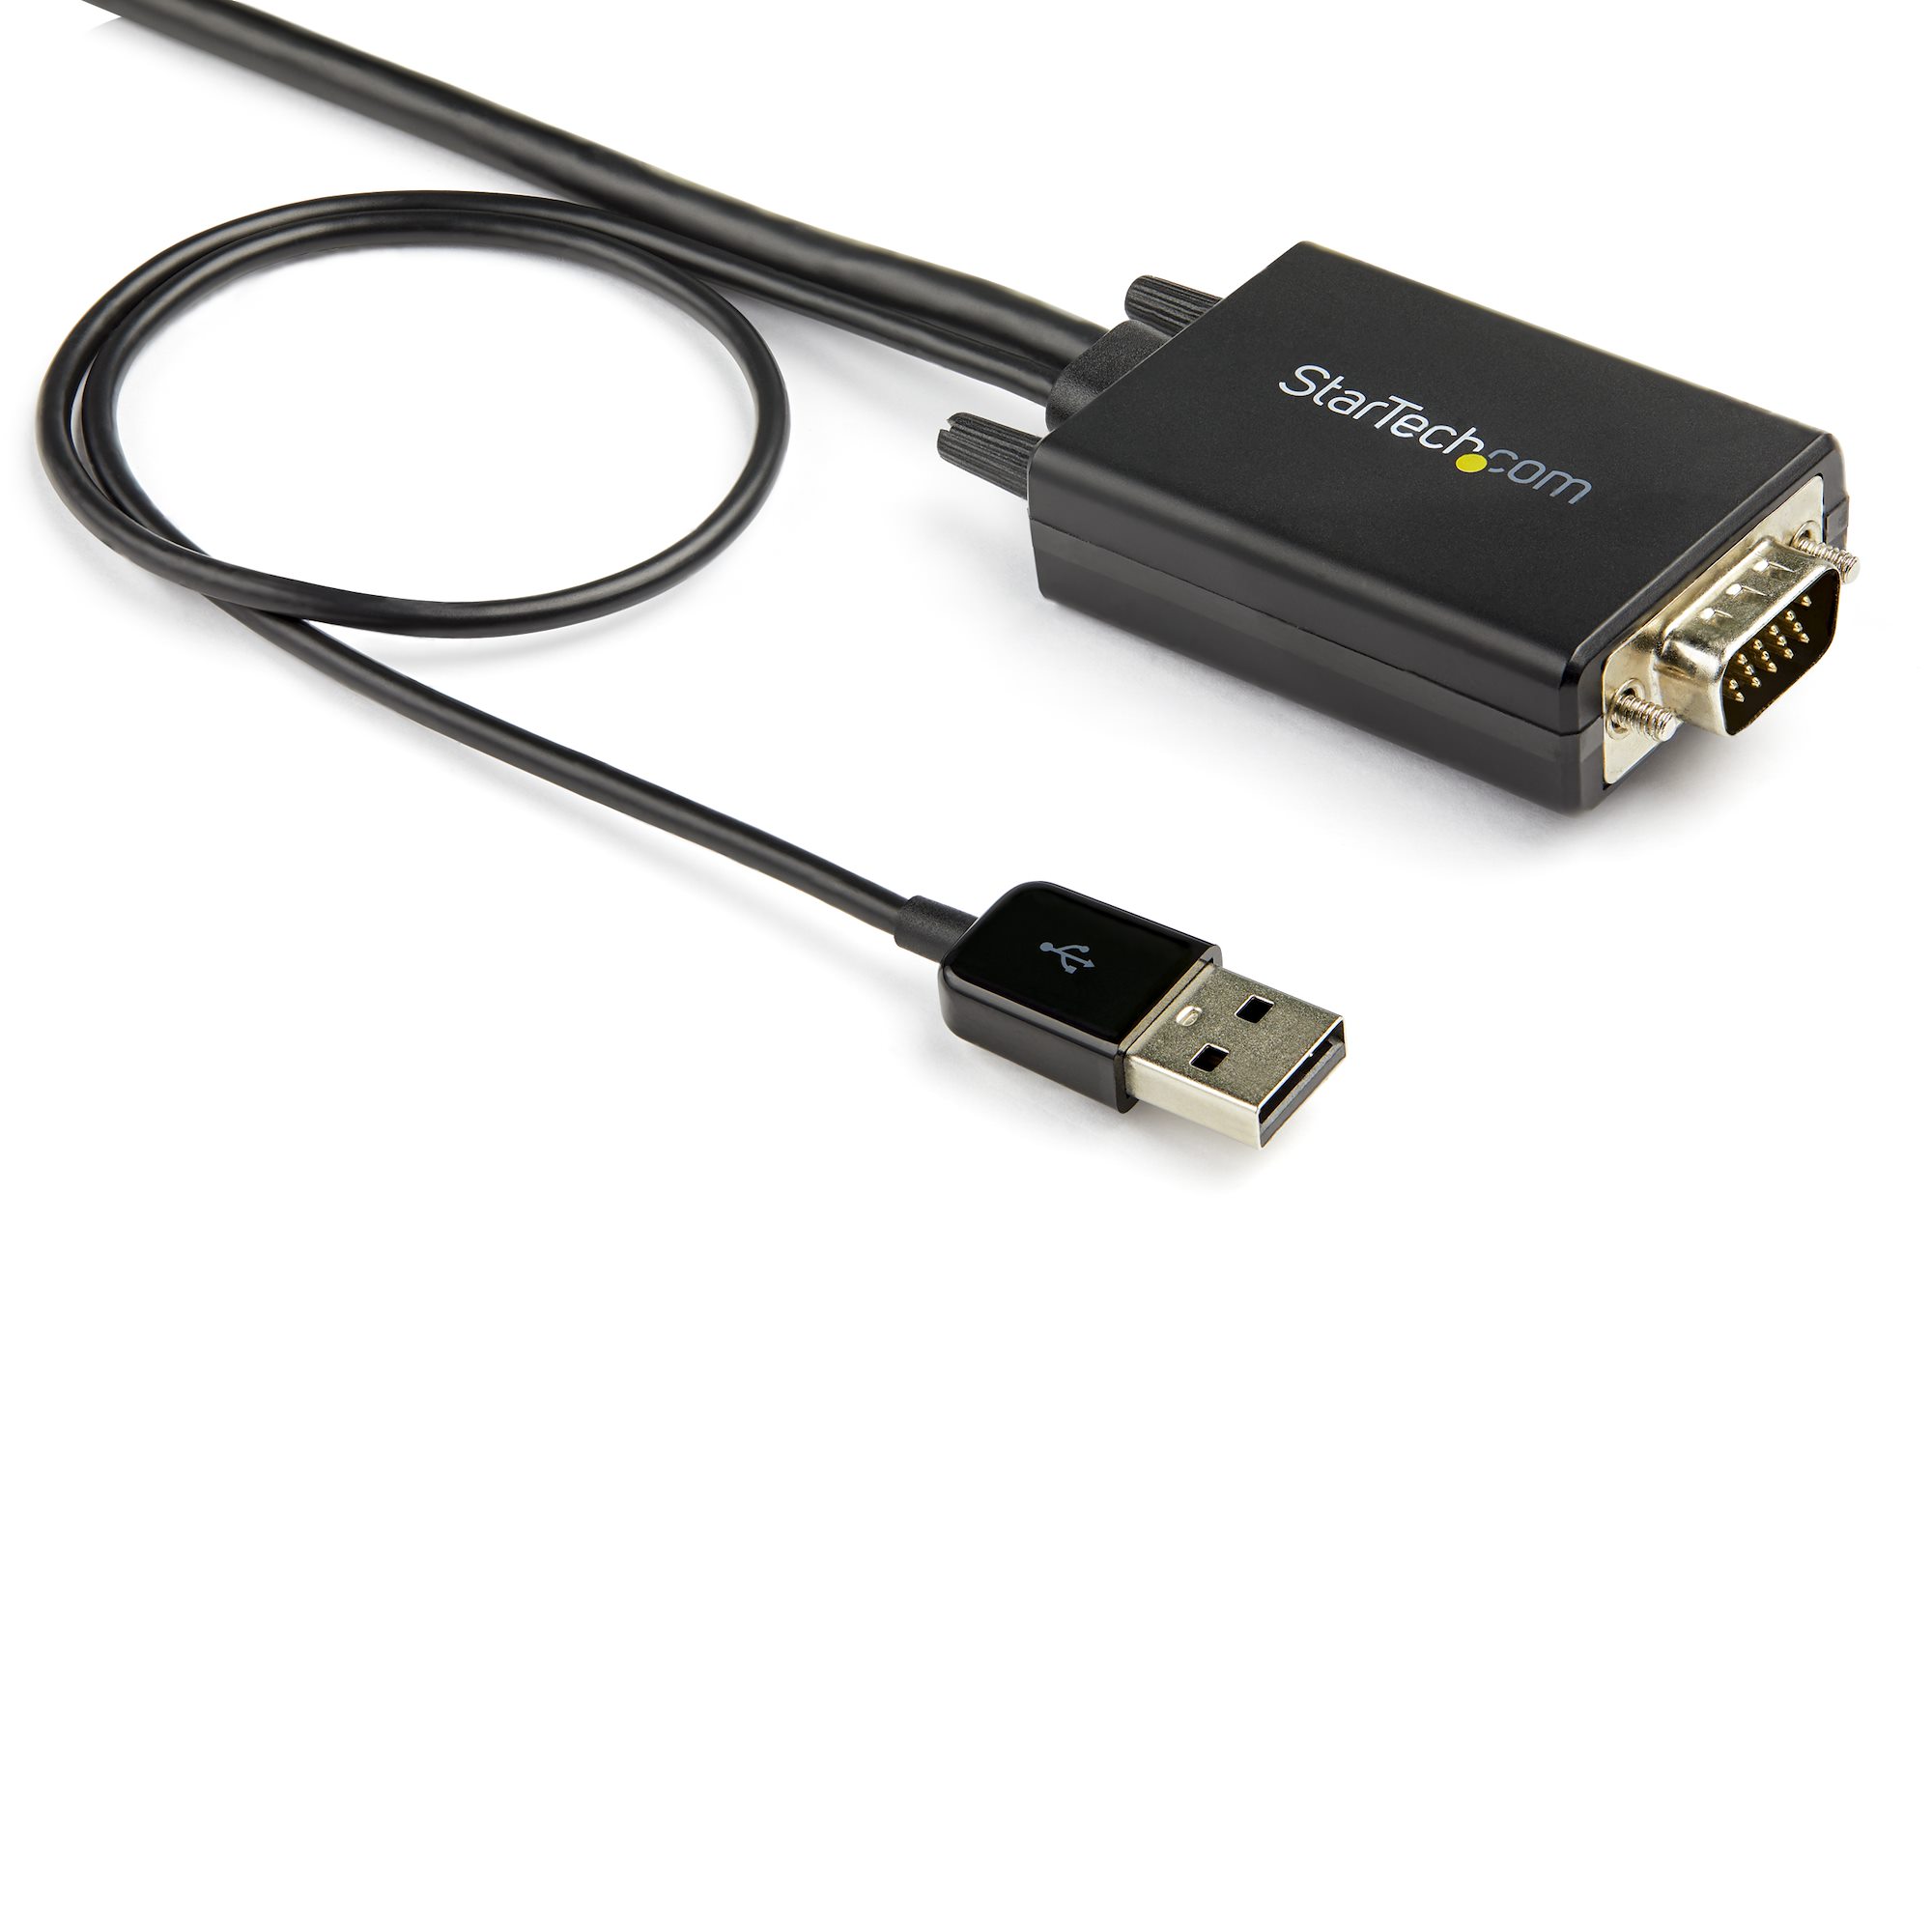 10ft VGA to HDMI Converter Cable Adapter - Audio Signal Converters